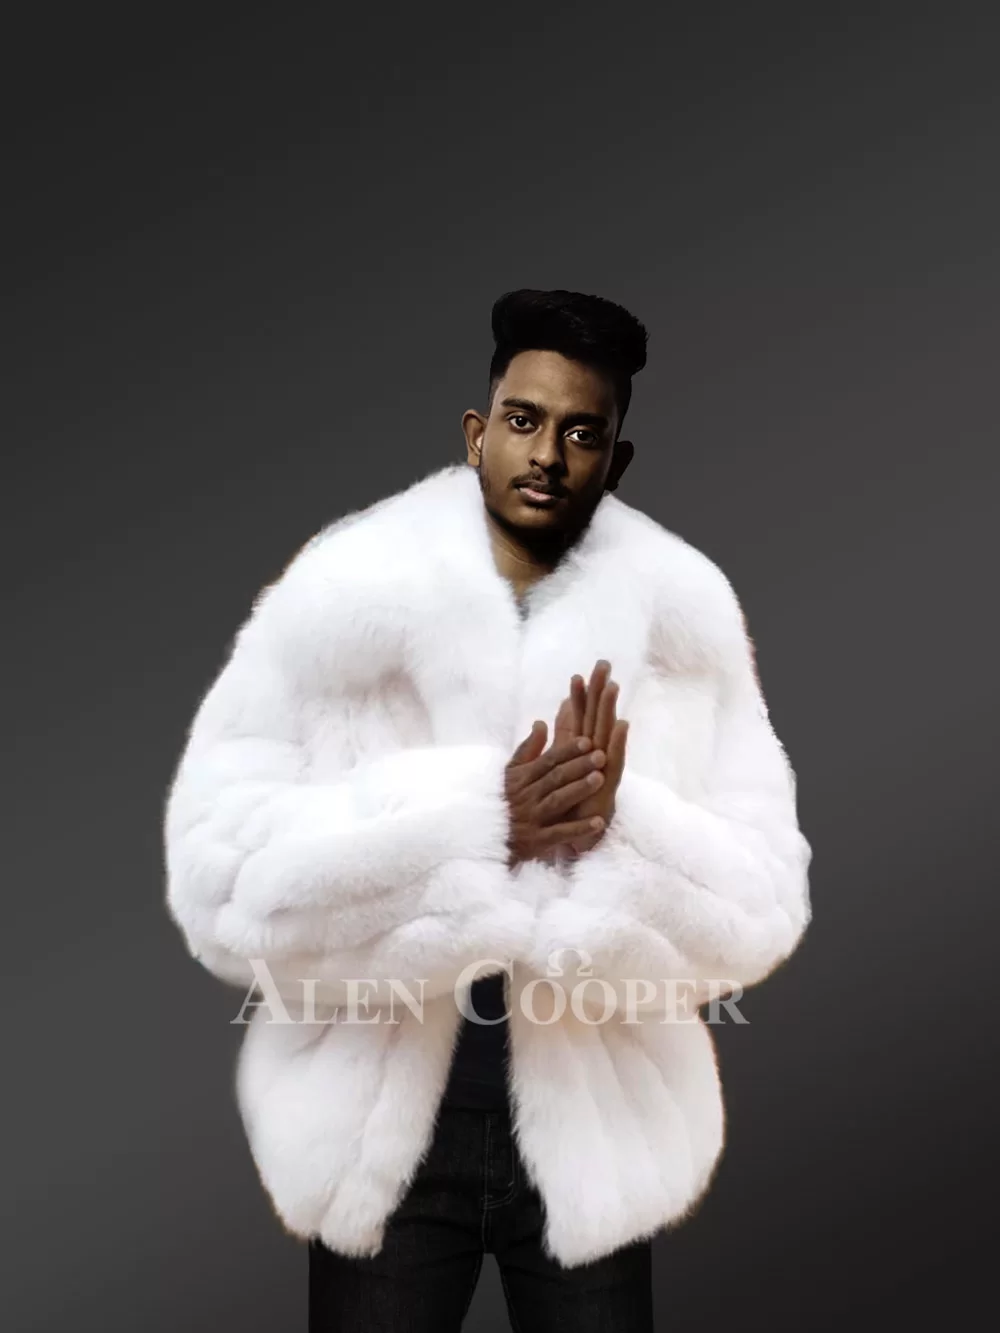 Arctic fox fur jacket for men to reinvent your masculinity